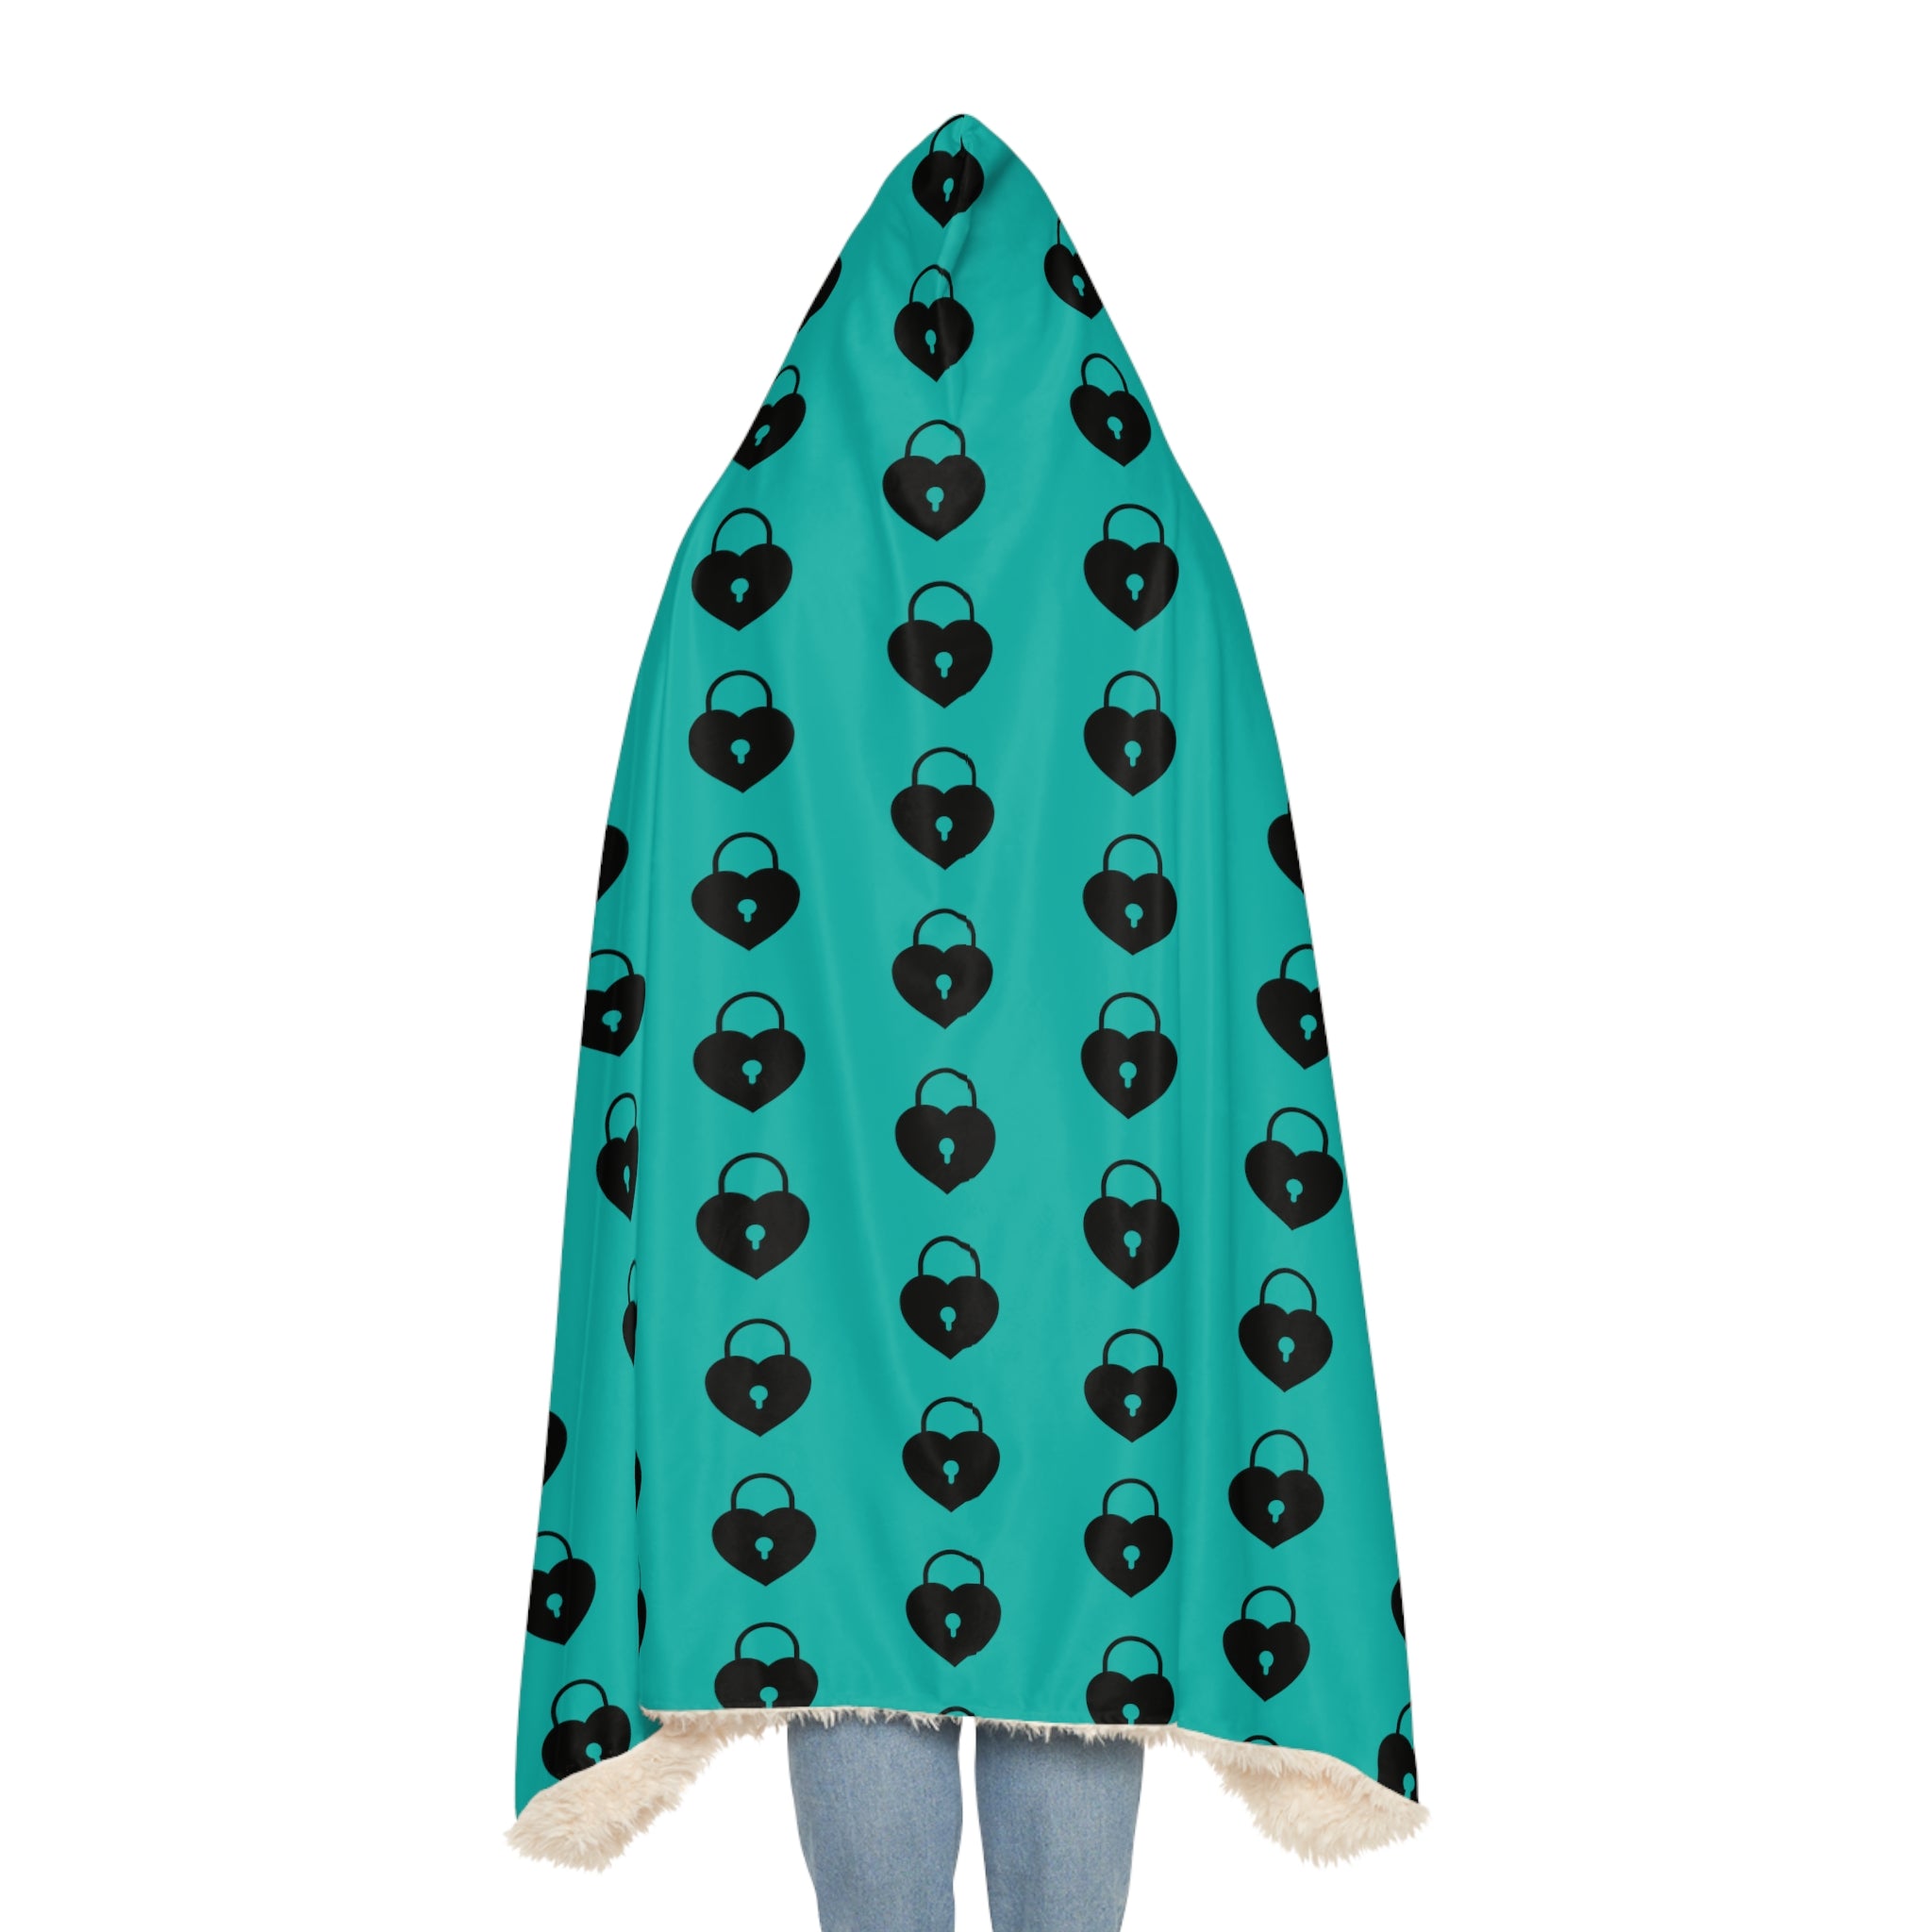 At Home Collection Large Lock Pattern on Tiffany Blue Snuggle Blanket, Hooded Sherpa, Oversized Hooded Cape All Over Prints  The Middle Aged Groove